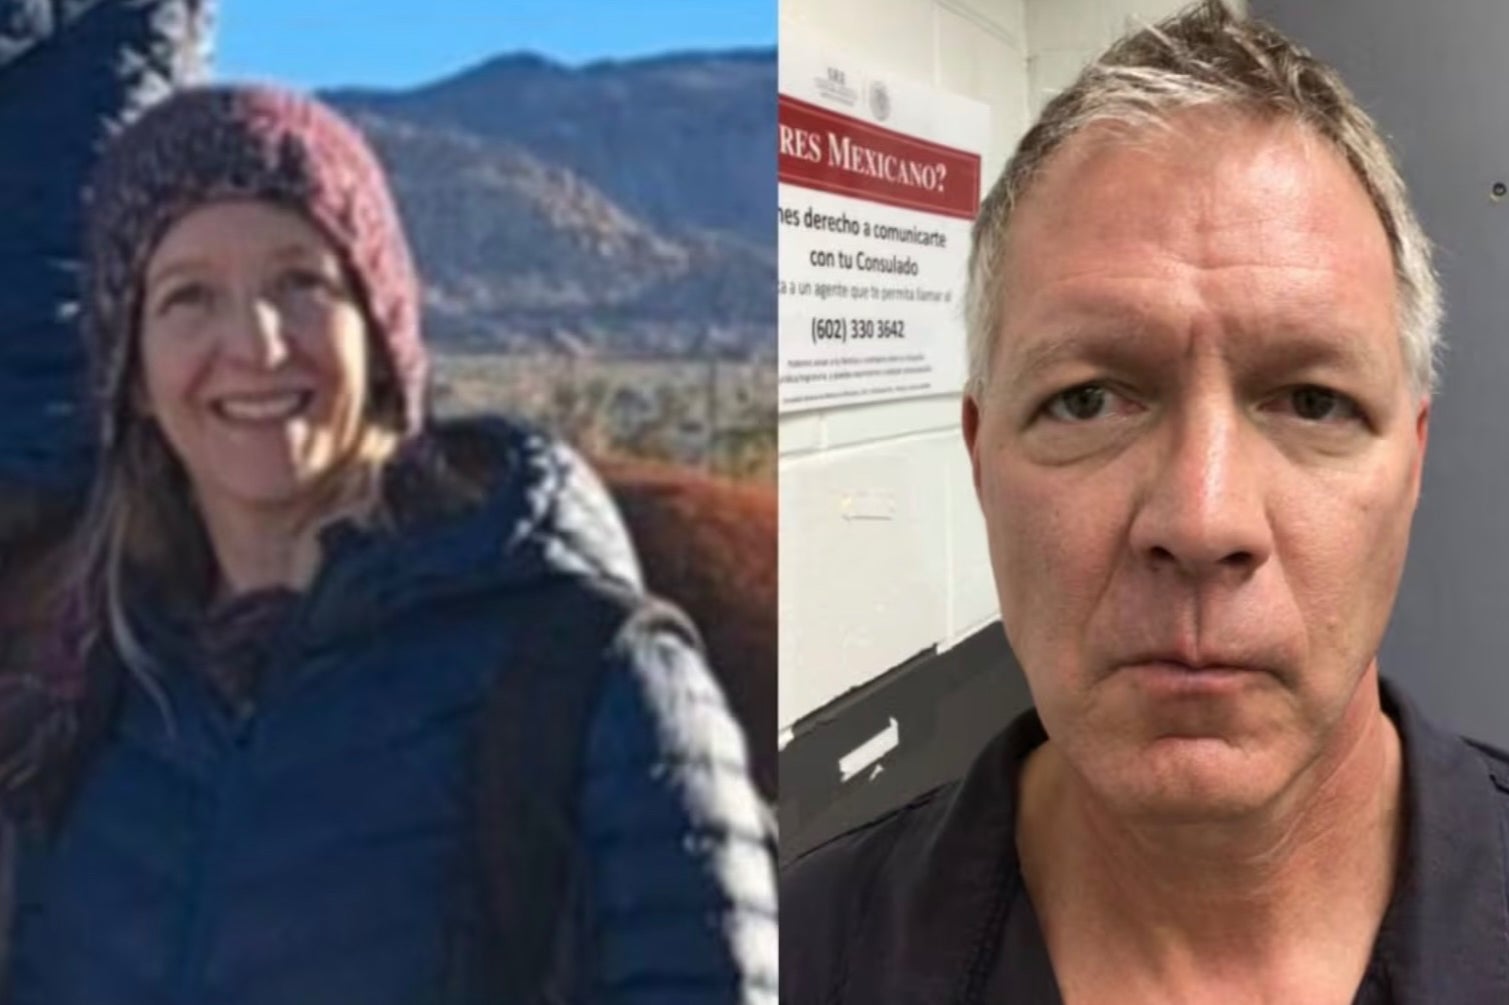 Daniel Anthony Paduchowski, 58, was arrested on Monday after he told authorities that his wife, Kelly Paduchowski, 45, had vanished